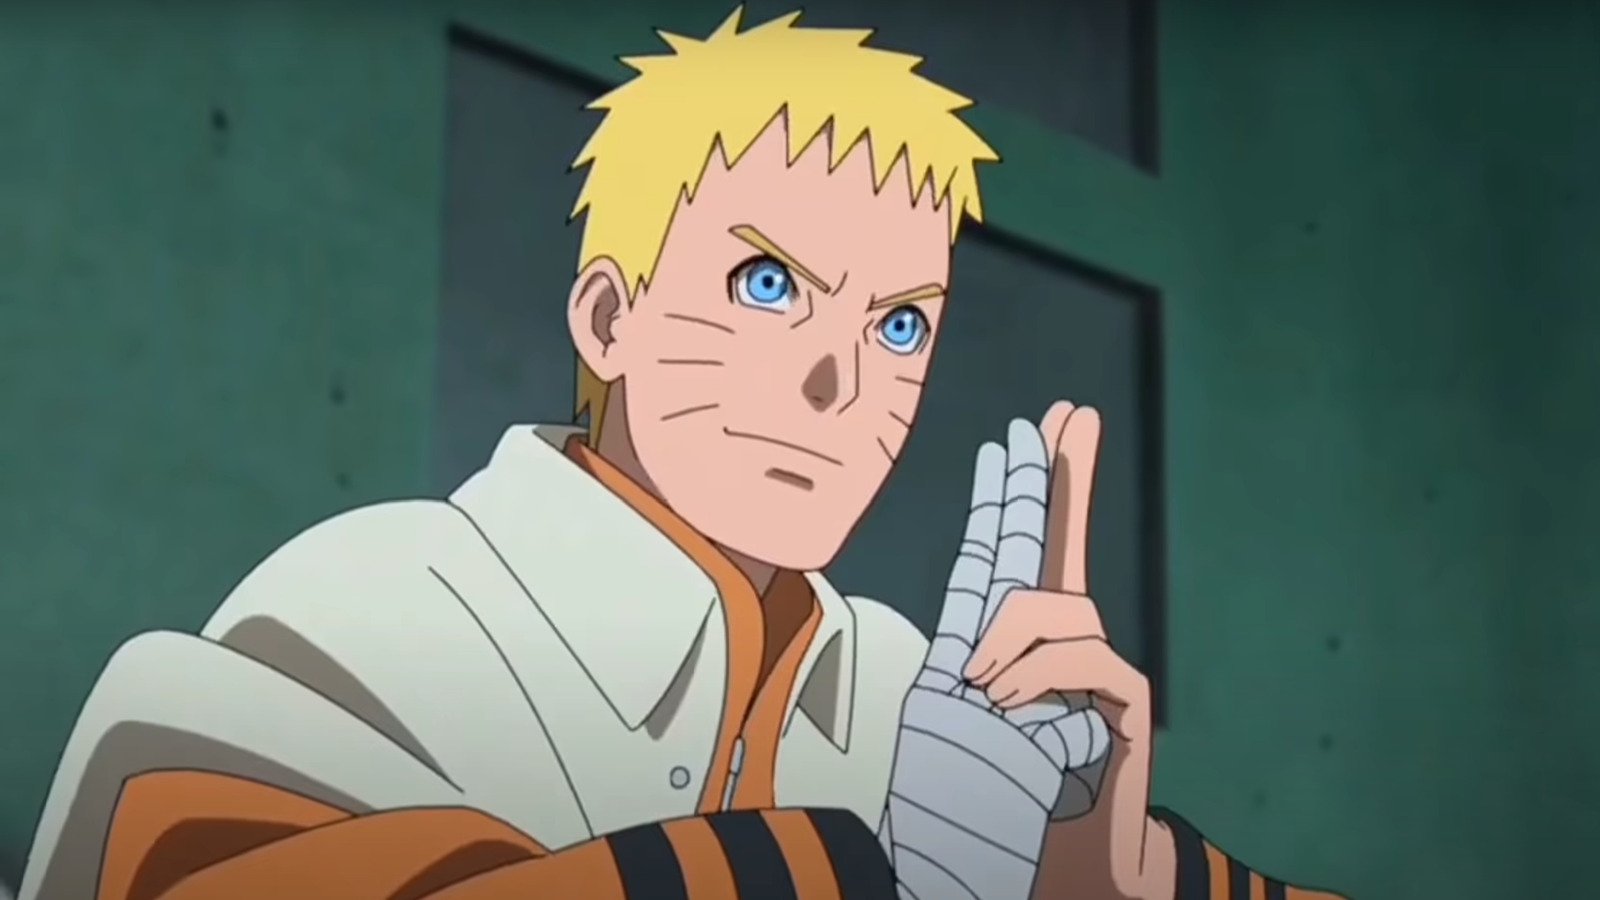 Boruto: The complete episode guide so you don't get lost! - just focus